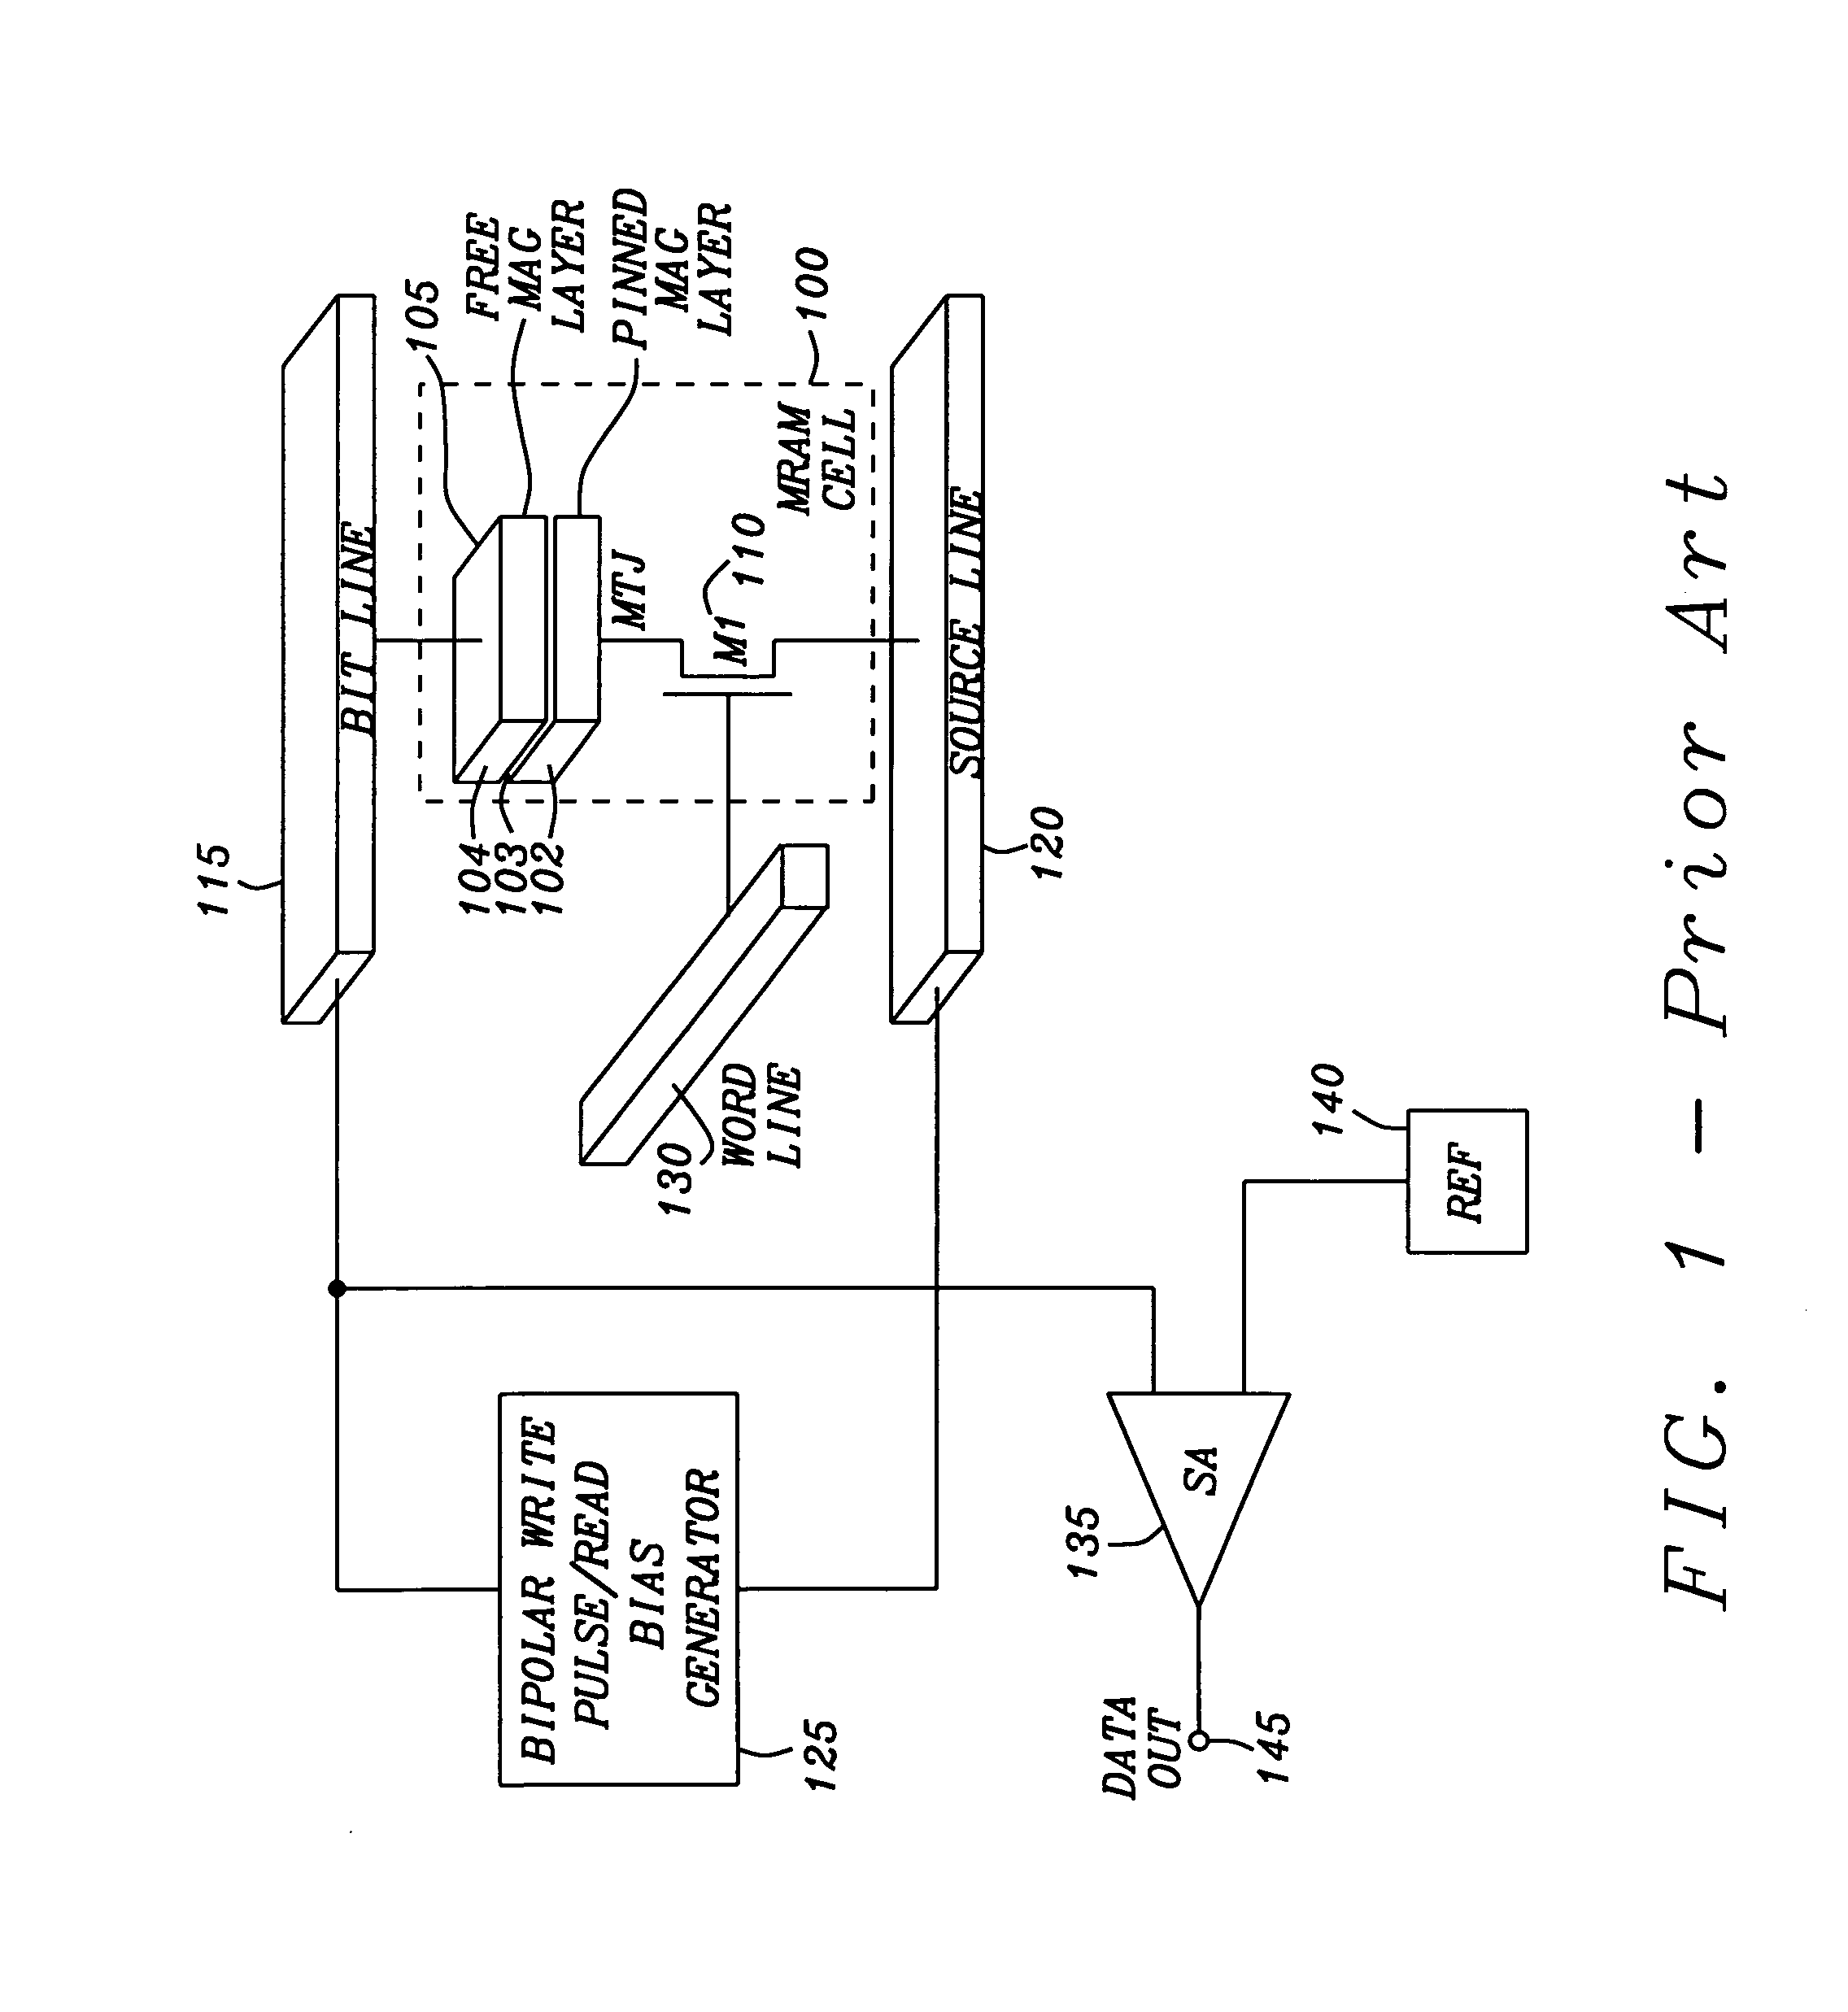 Method and apparatus for scrubbing accumulated data errors from a memory system